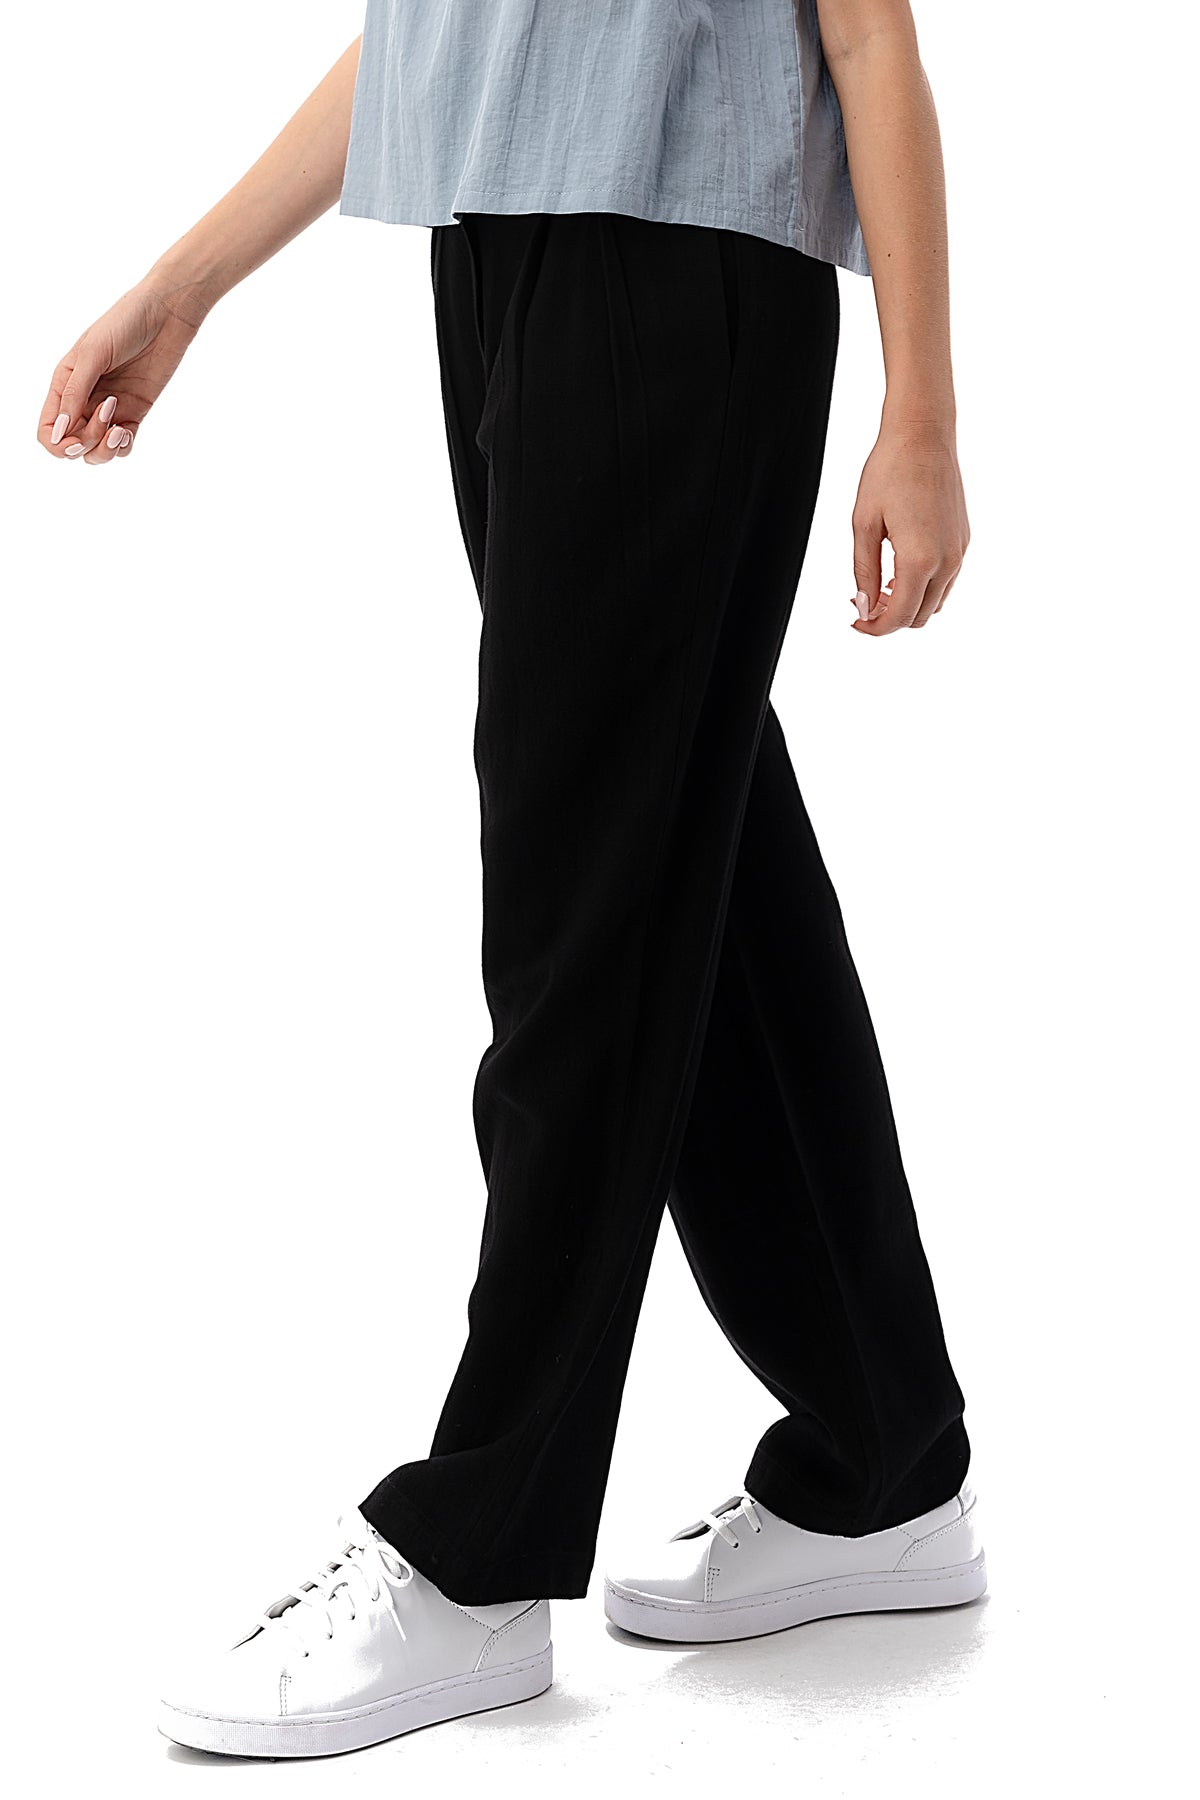 EDGY Land Girl's and Women's Pleated High Band Waist Slit Pocket Casual Pegged Long Pant